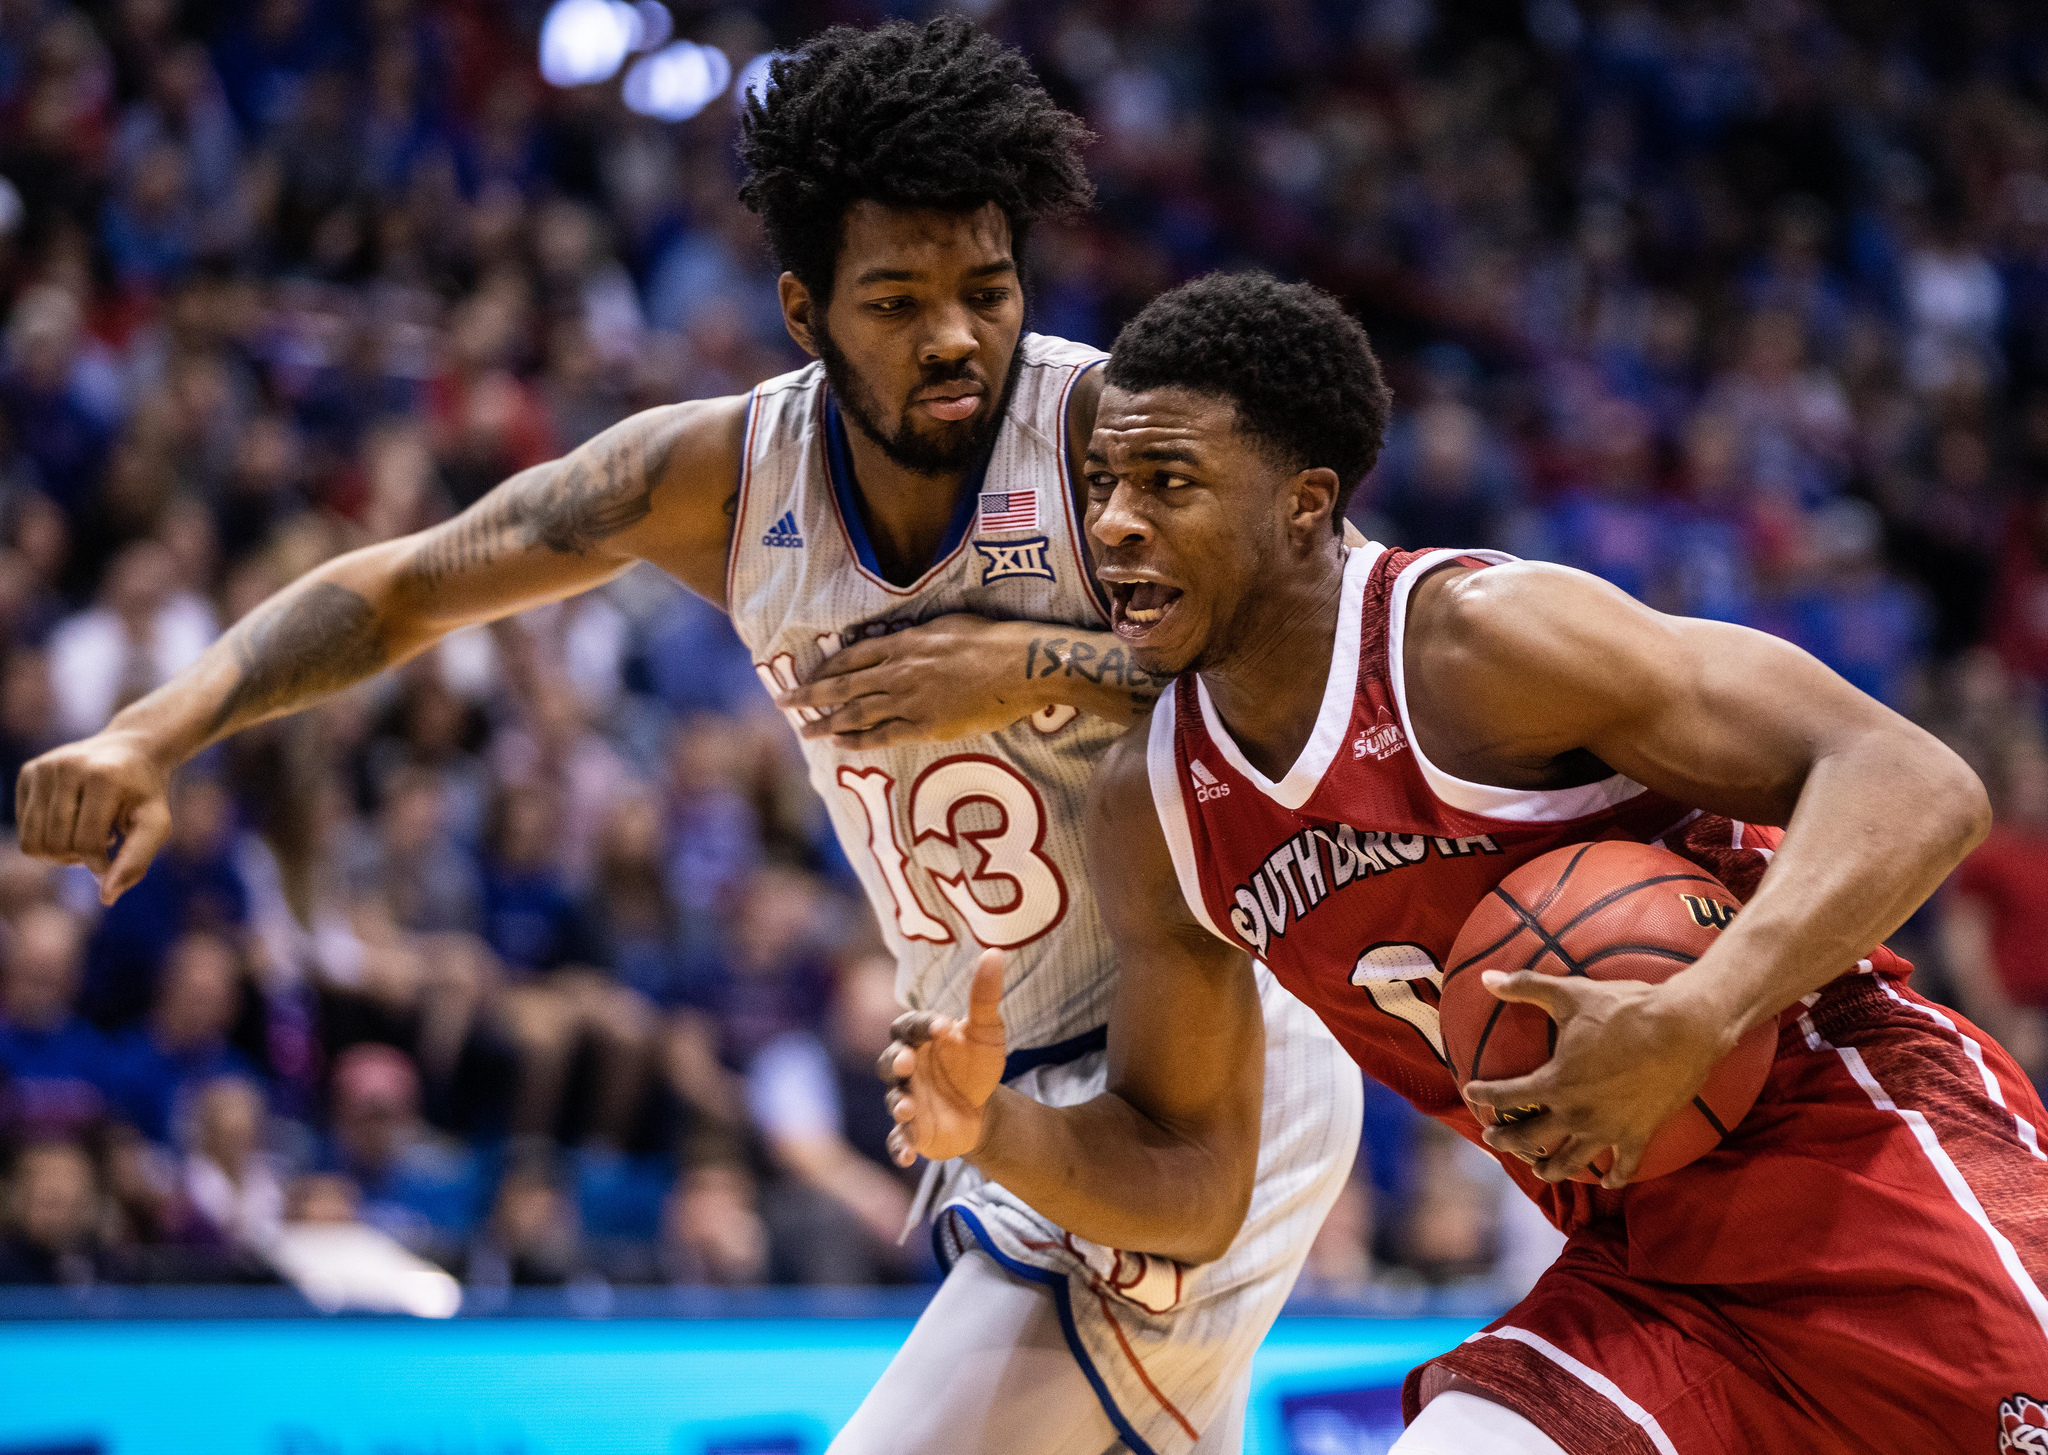 Coyotes can’t respond to second half push from No. 1 Kansas